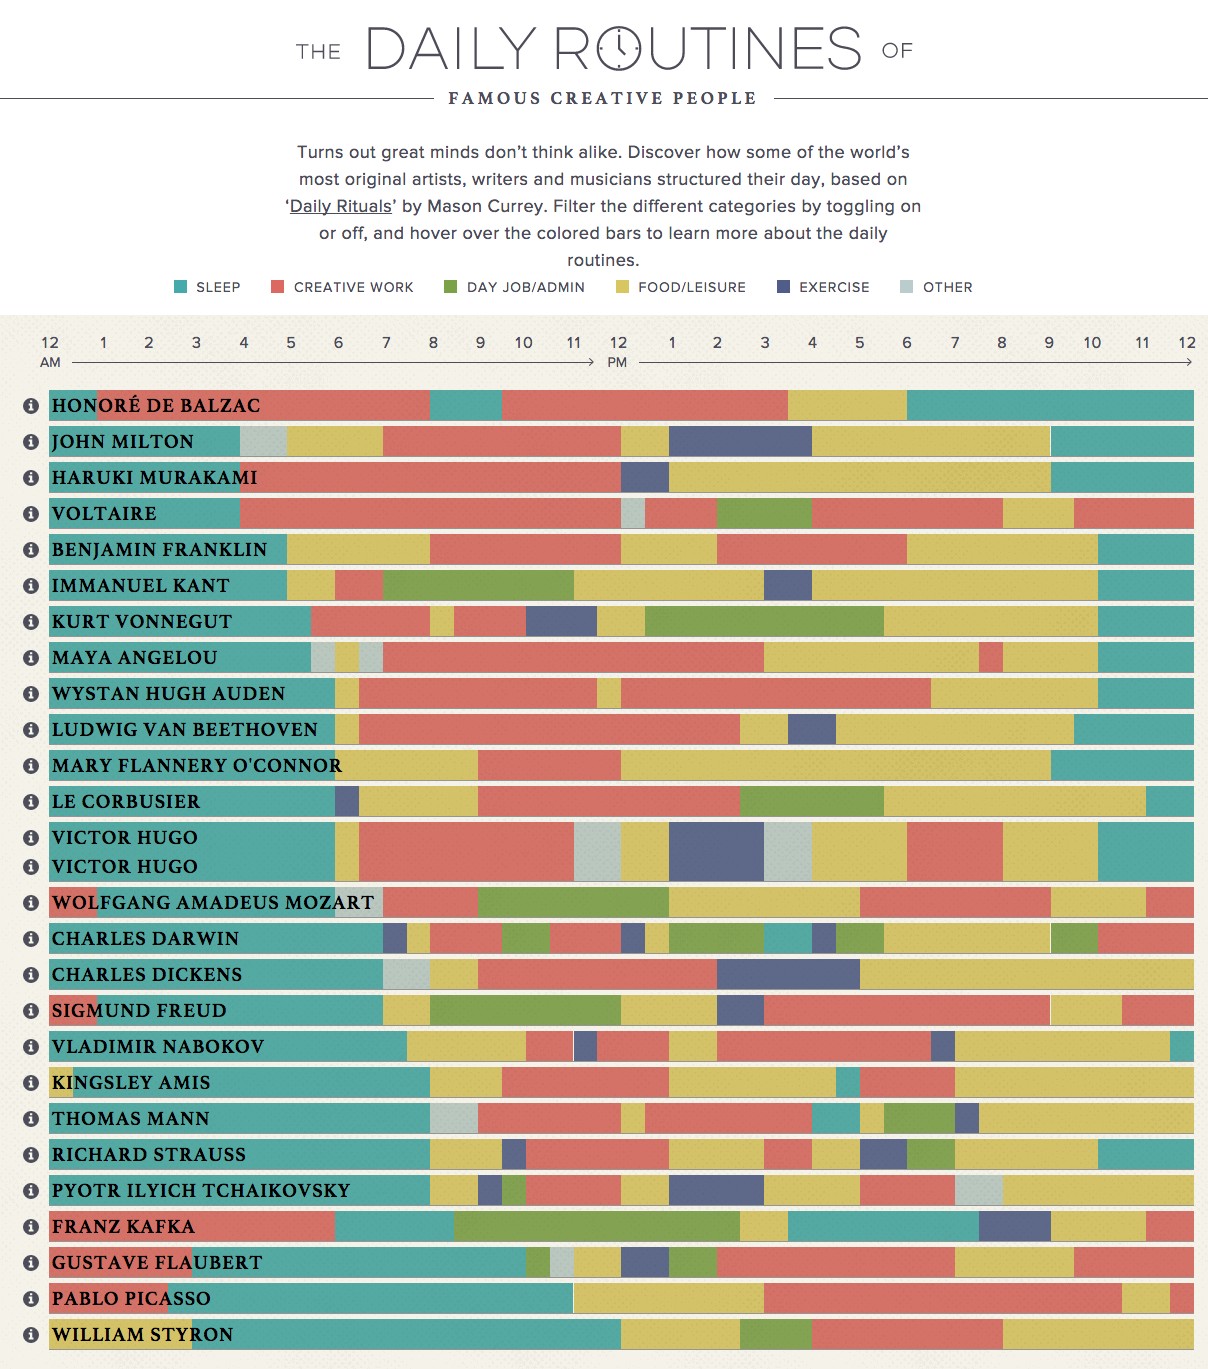 daily routines of creative people data visualization example